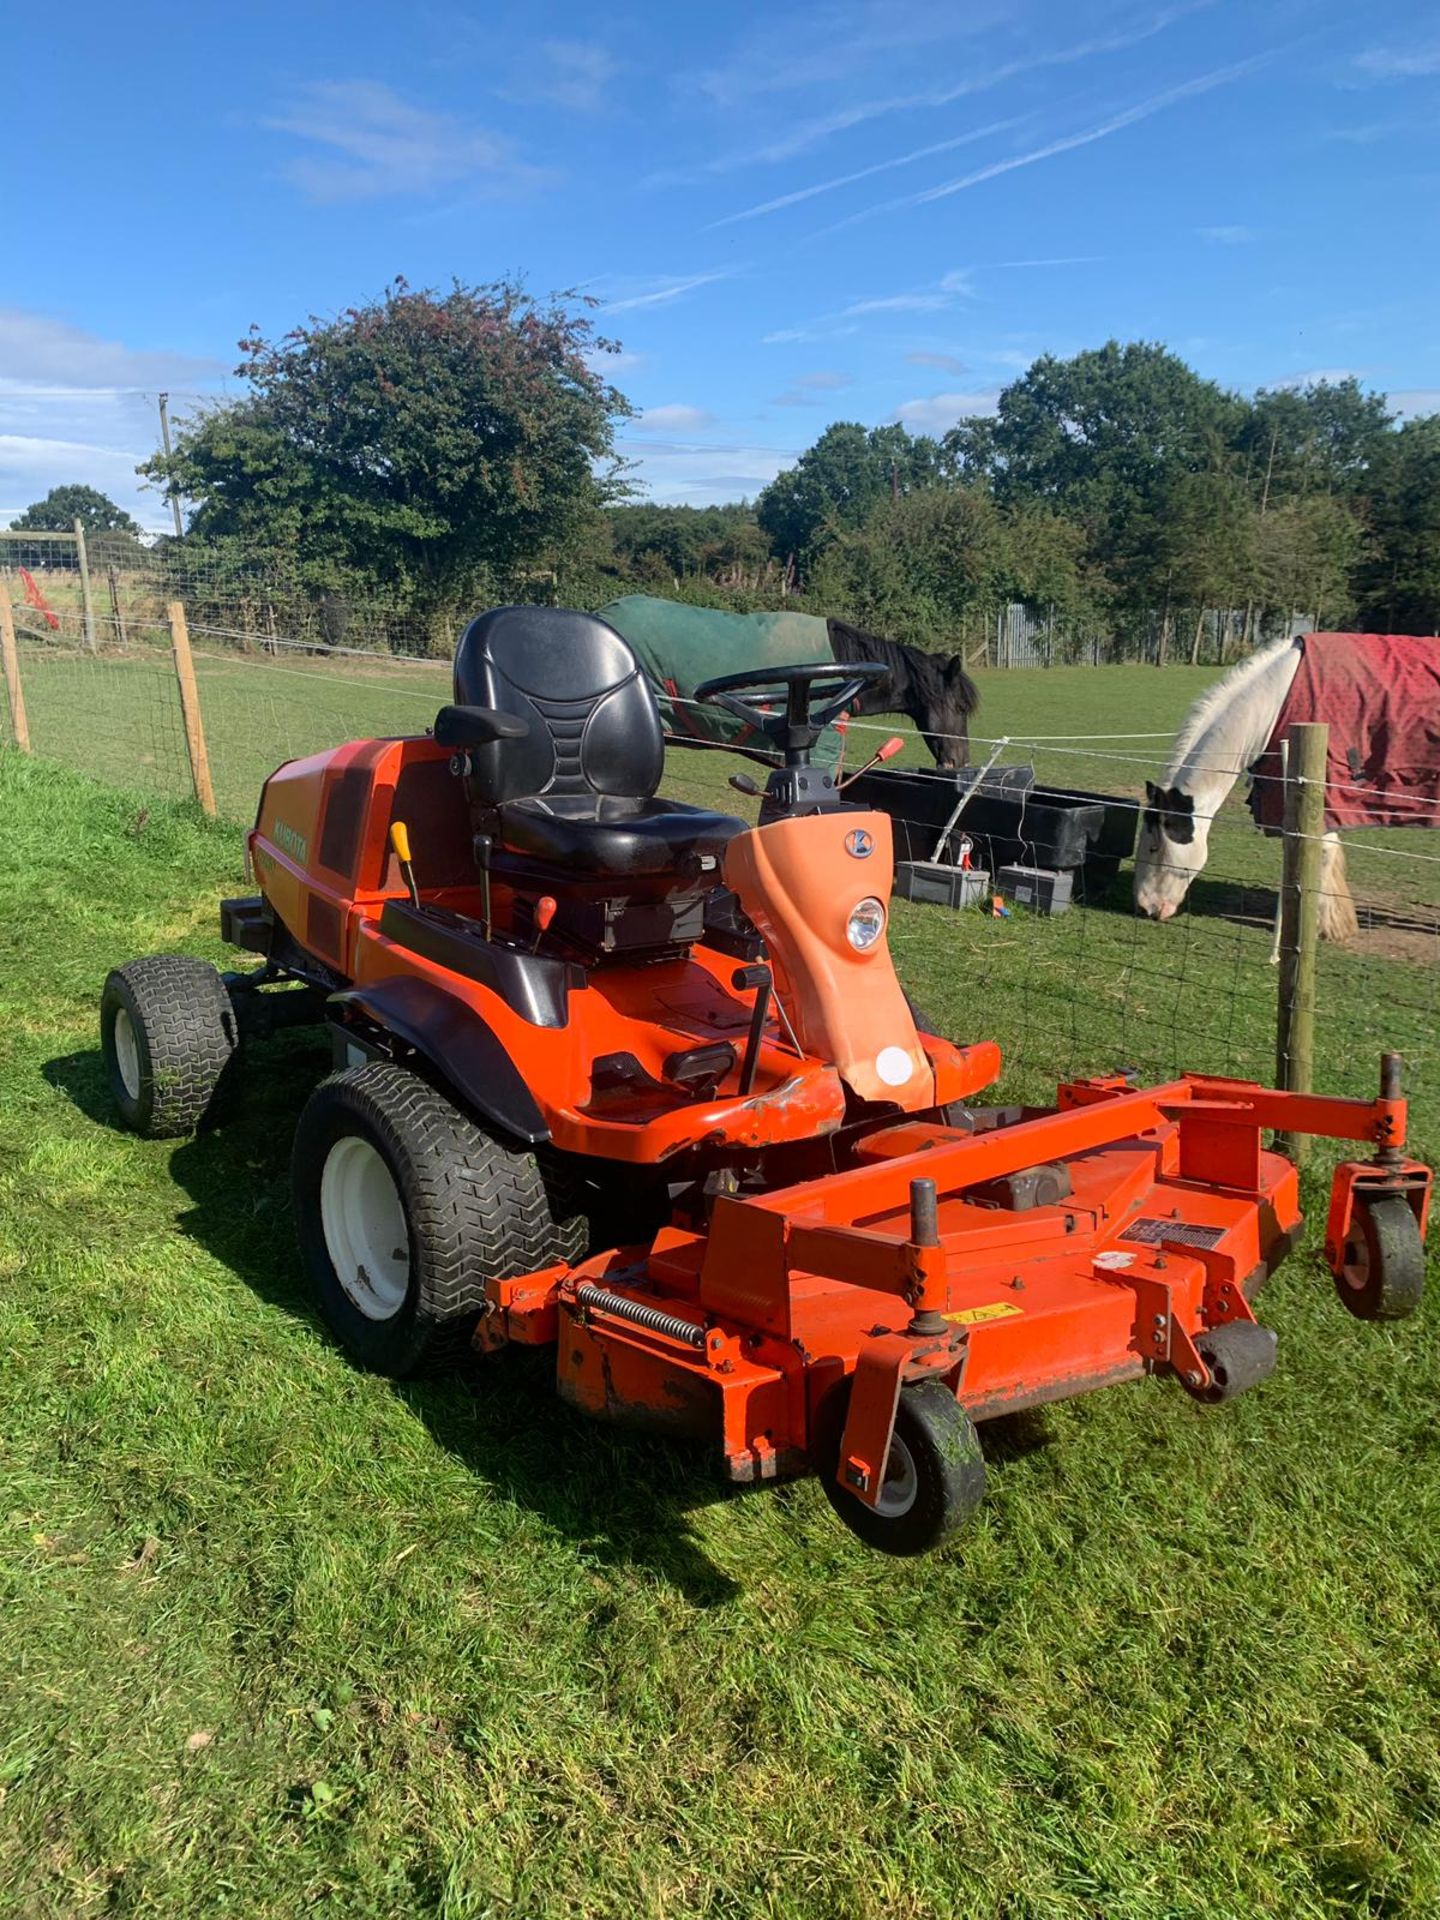 2012 KUBOTA F3680 OUT FRONT 4WD HST MOWER, TURF TYRES, 35 HP DIESEL ENGINE *PLUS VAT* - Image 4 of 15